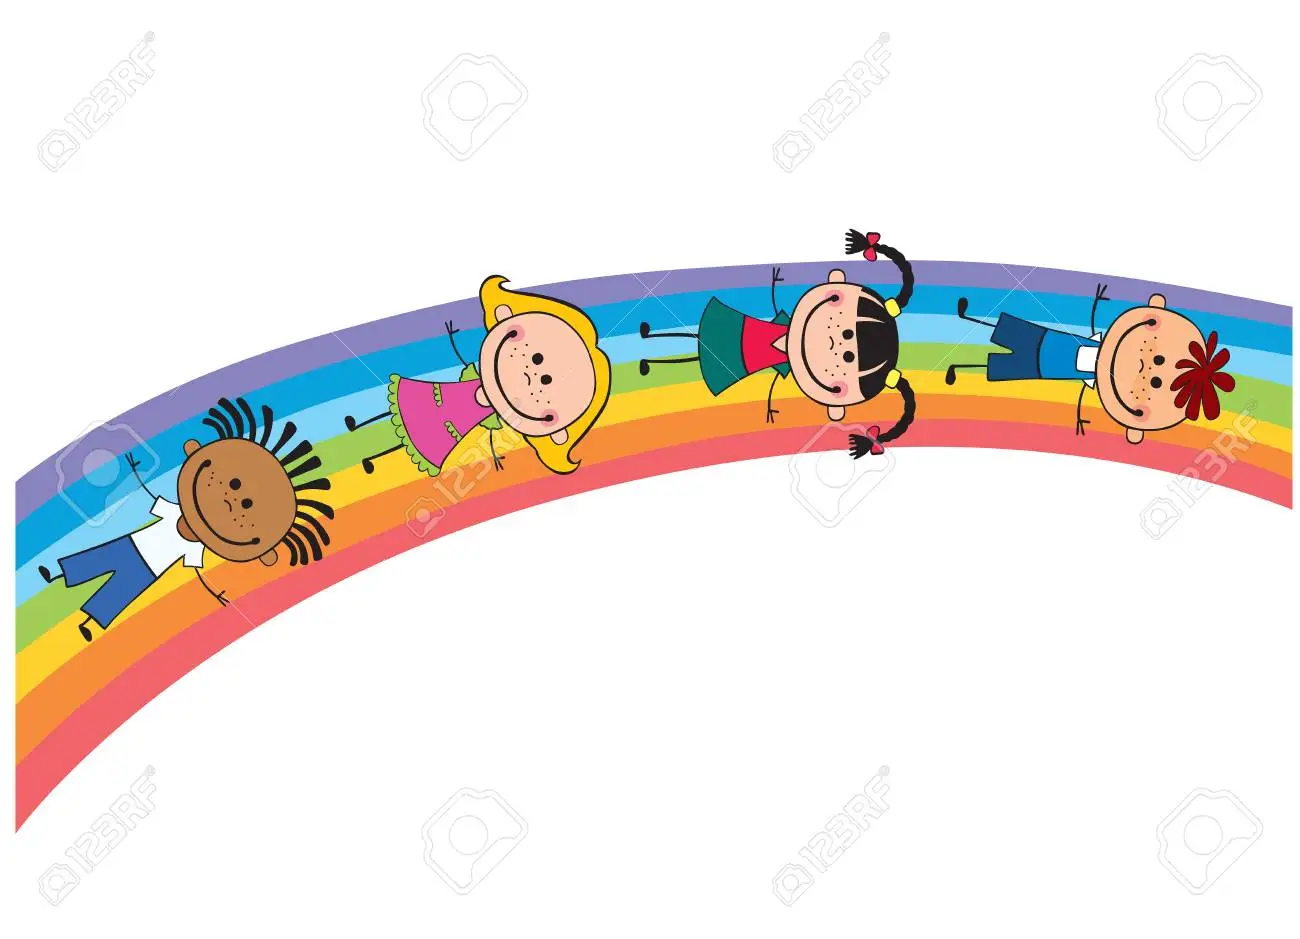 Vector background blank with kids summer camp royalty free svg cliparts vectors and stock illustration image